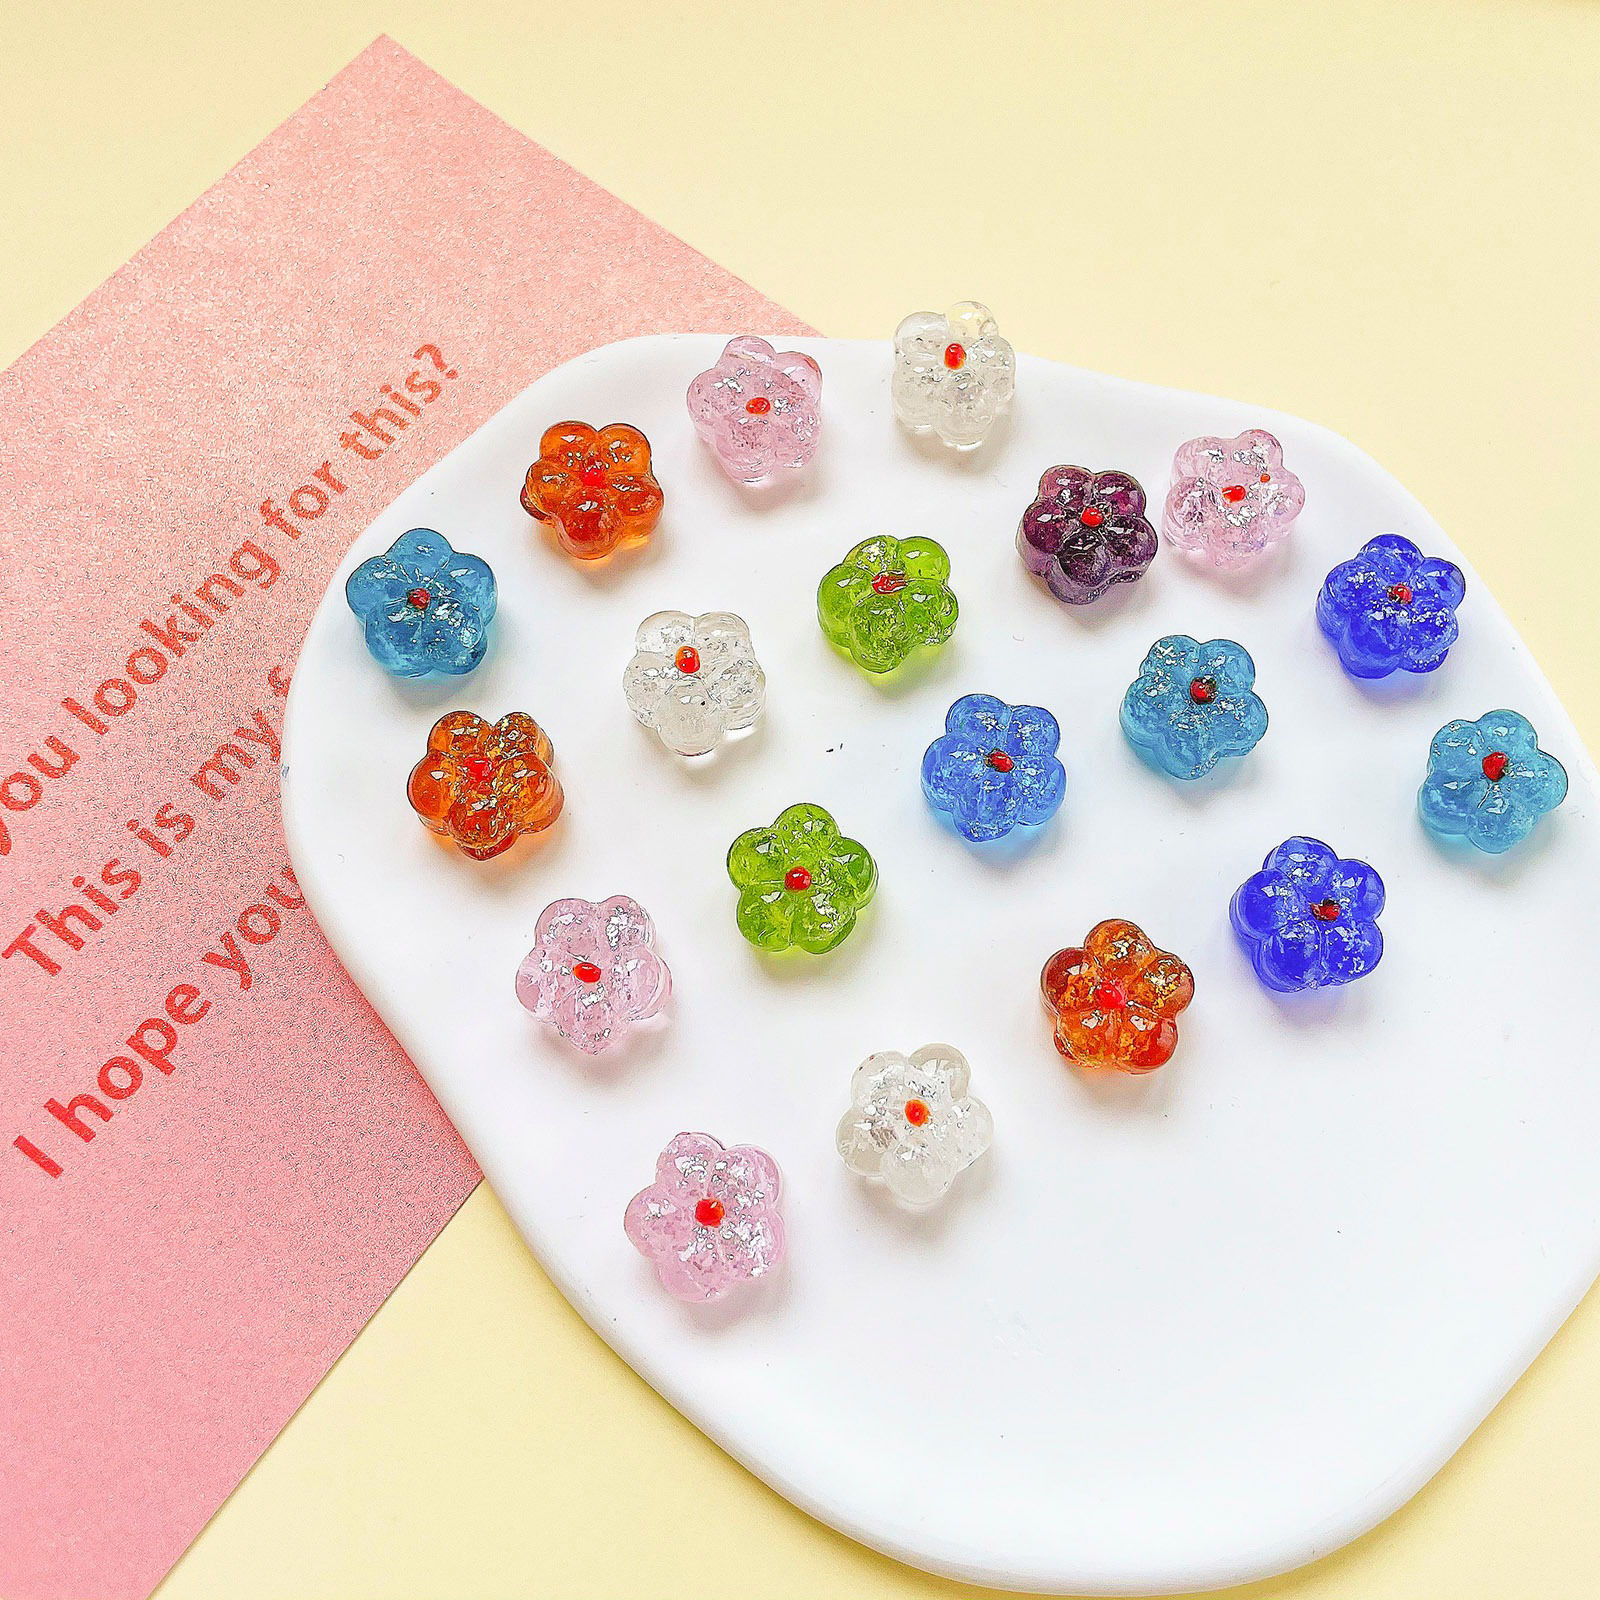 Picture of Lampwork Glass Flora Collection Beads Flower Multicolor Silver Lined About 15mm x 14mm, Hole: Approx 1mm, 10 PCs